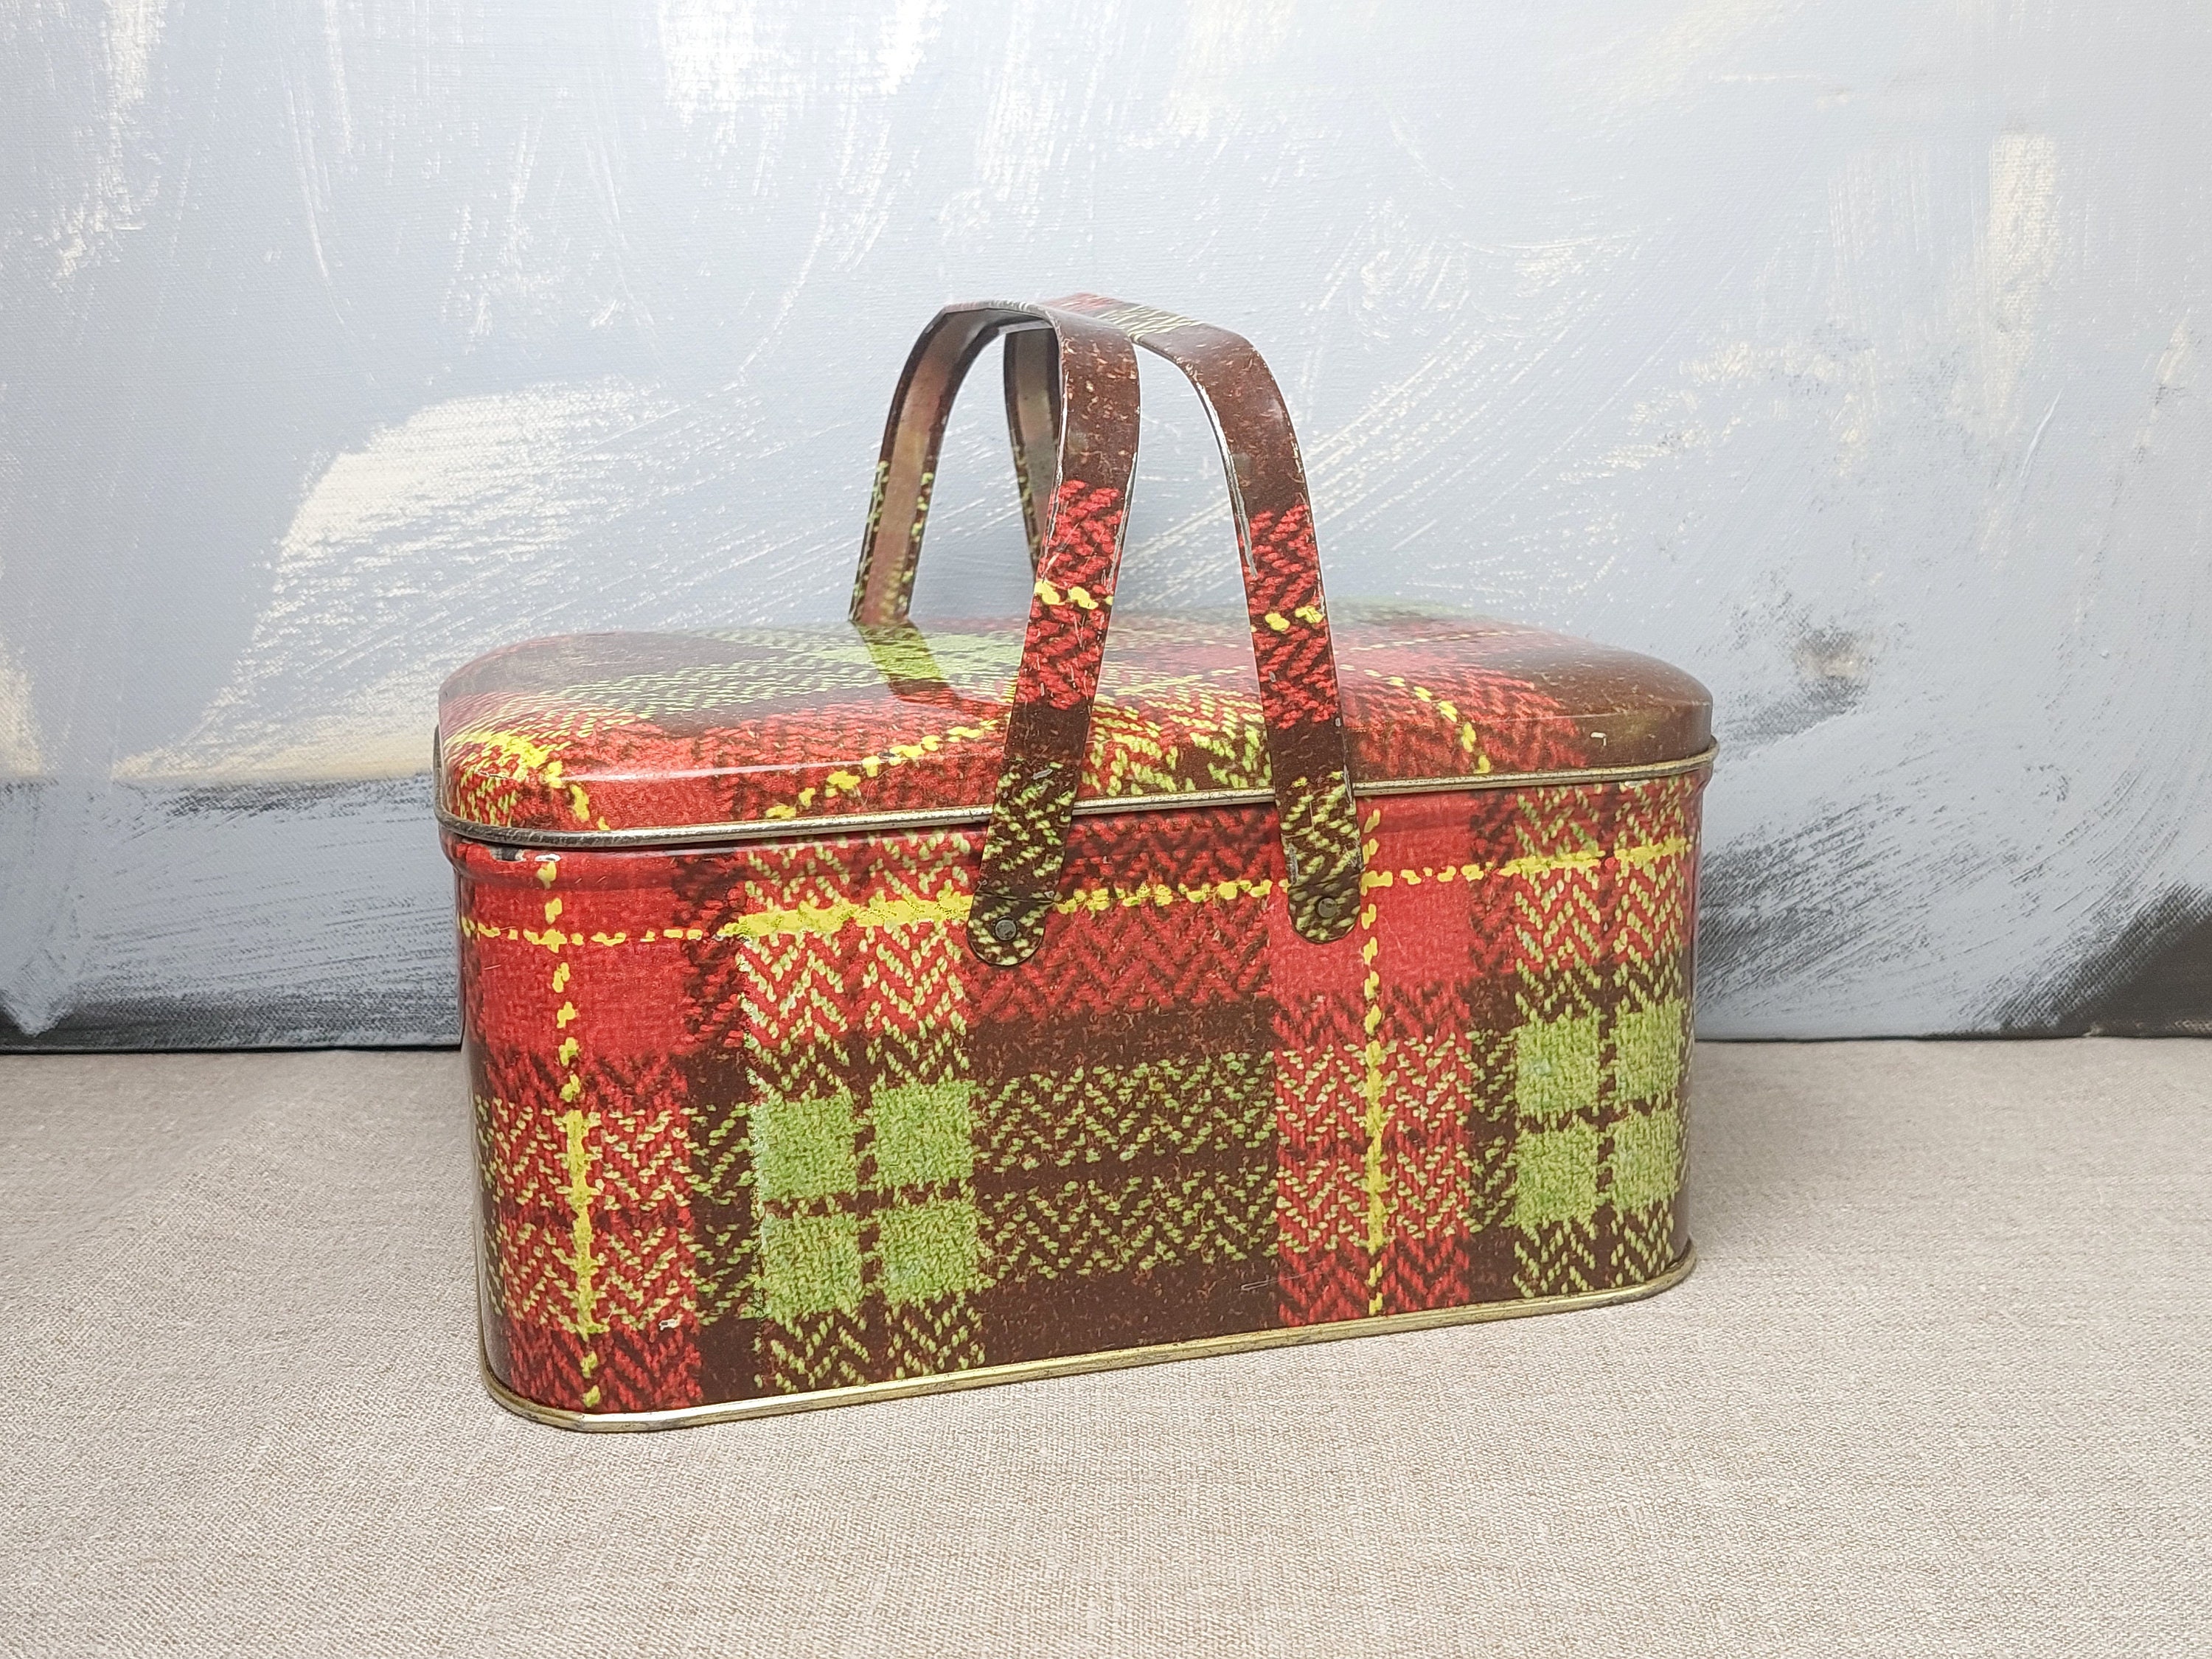 Squares Tartan Pattern Lunch Bag Insulated Lunch Box Plaid Lunch